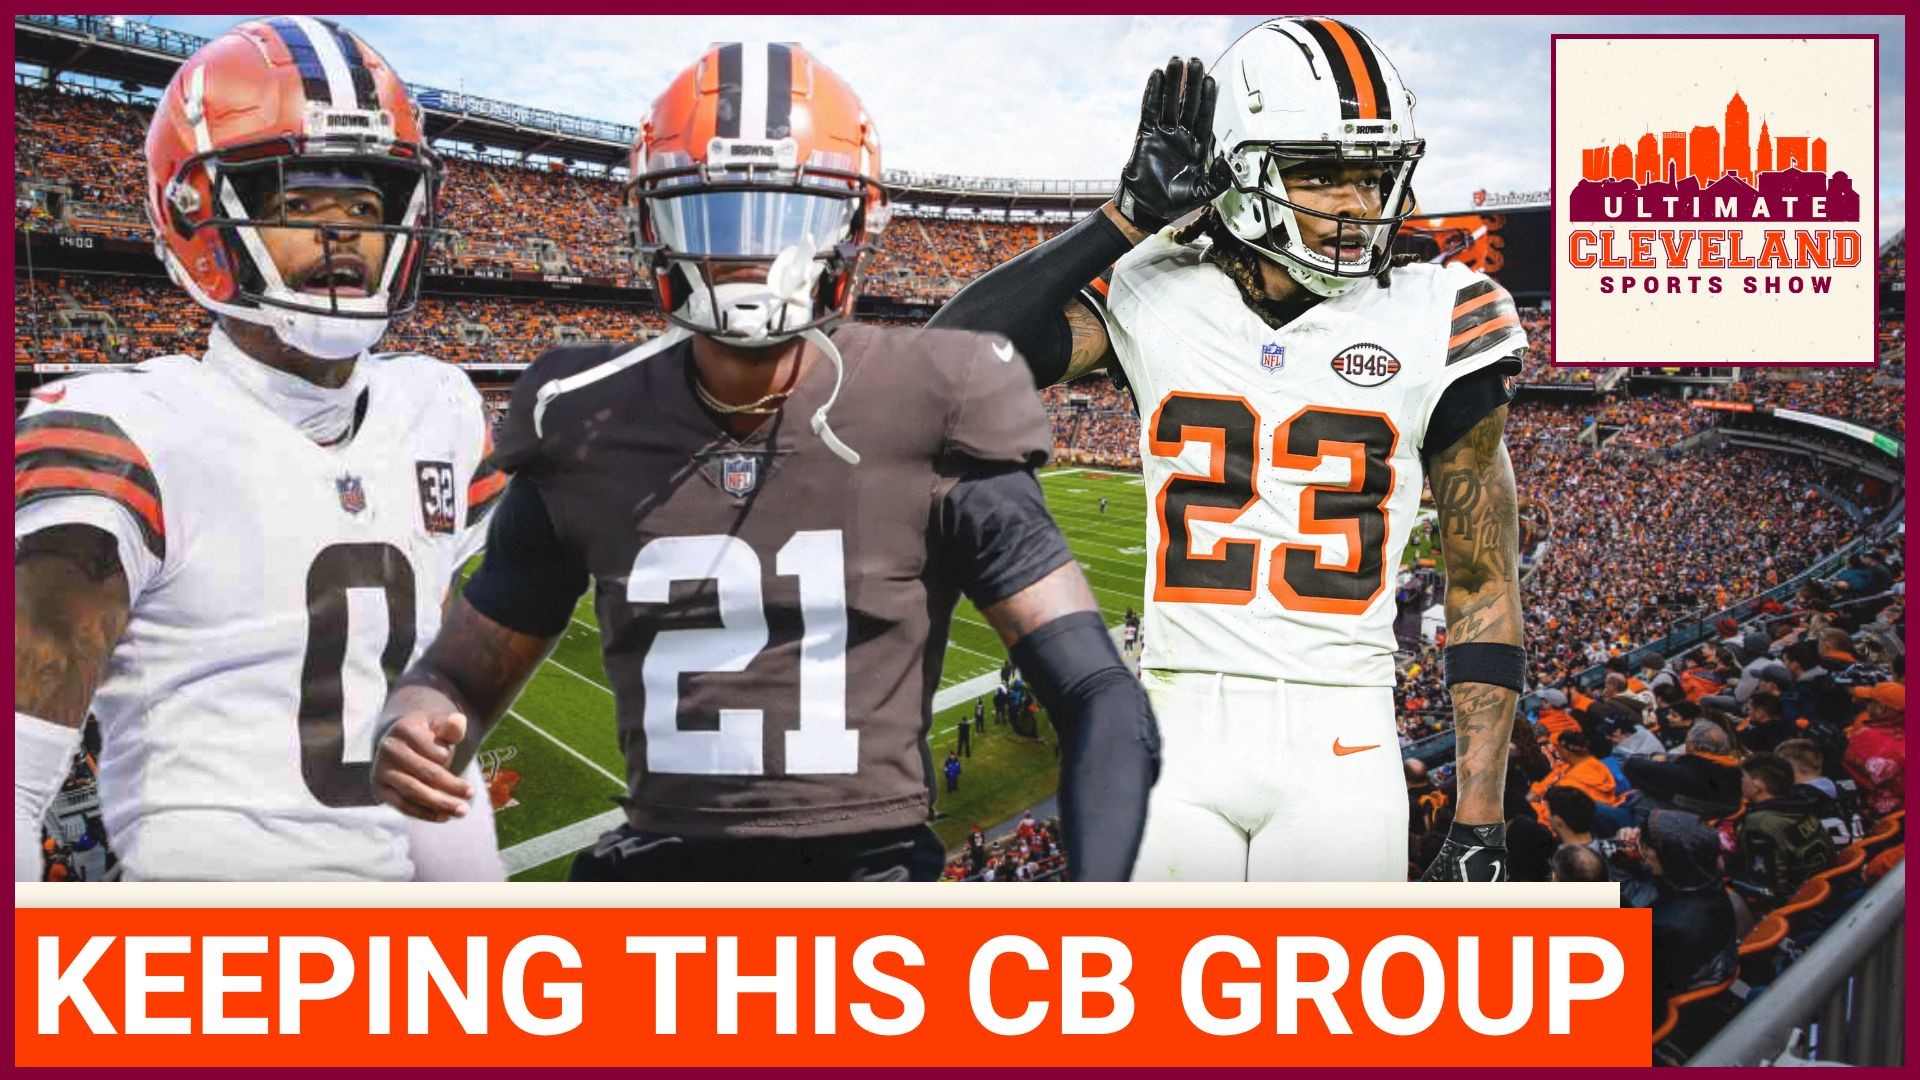 Should Andrew Berry attempt to do everything he can to keep the Browns CB trio together?